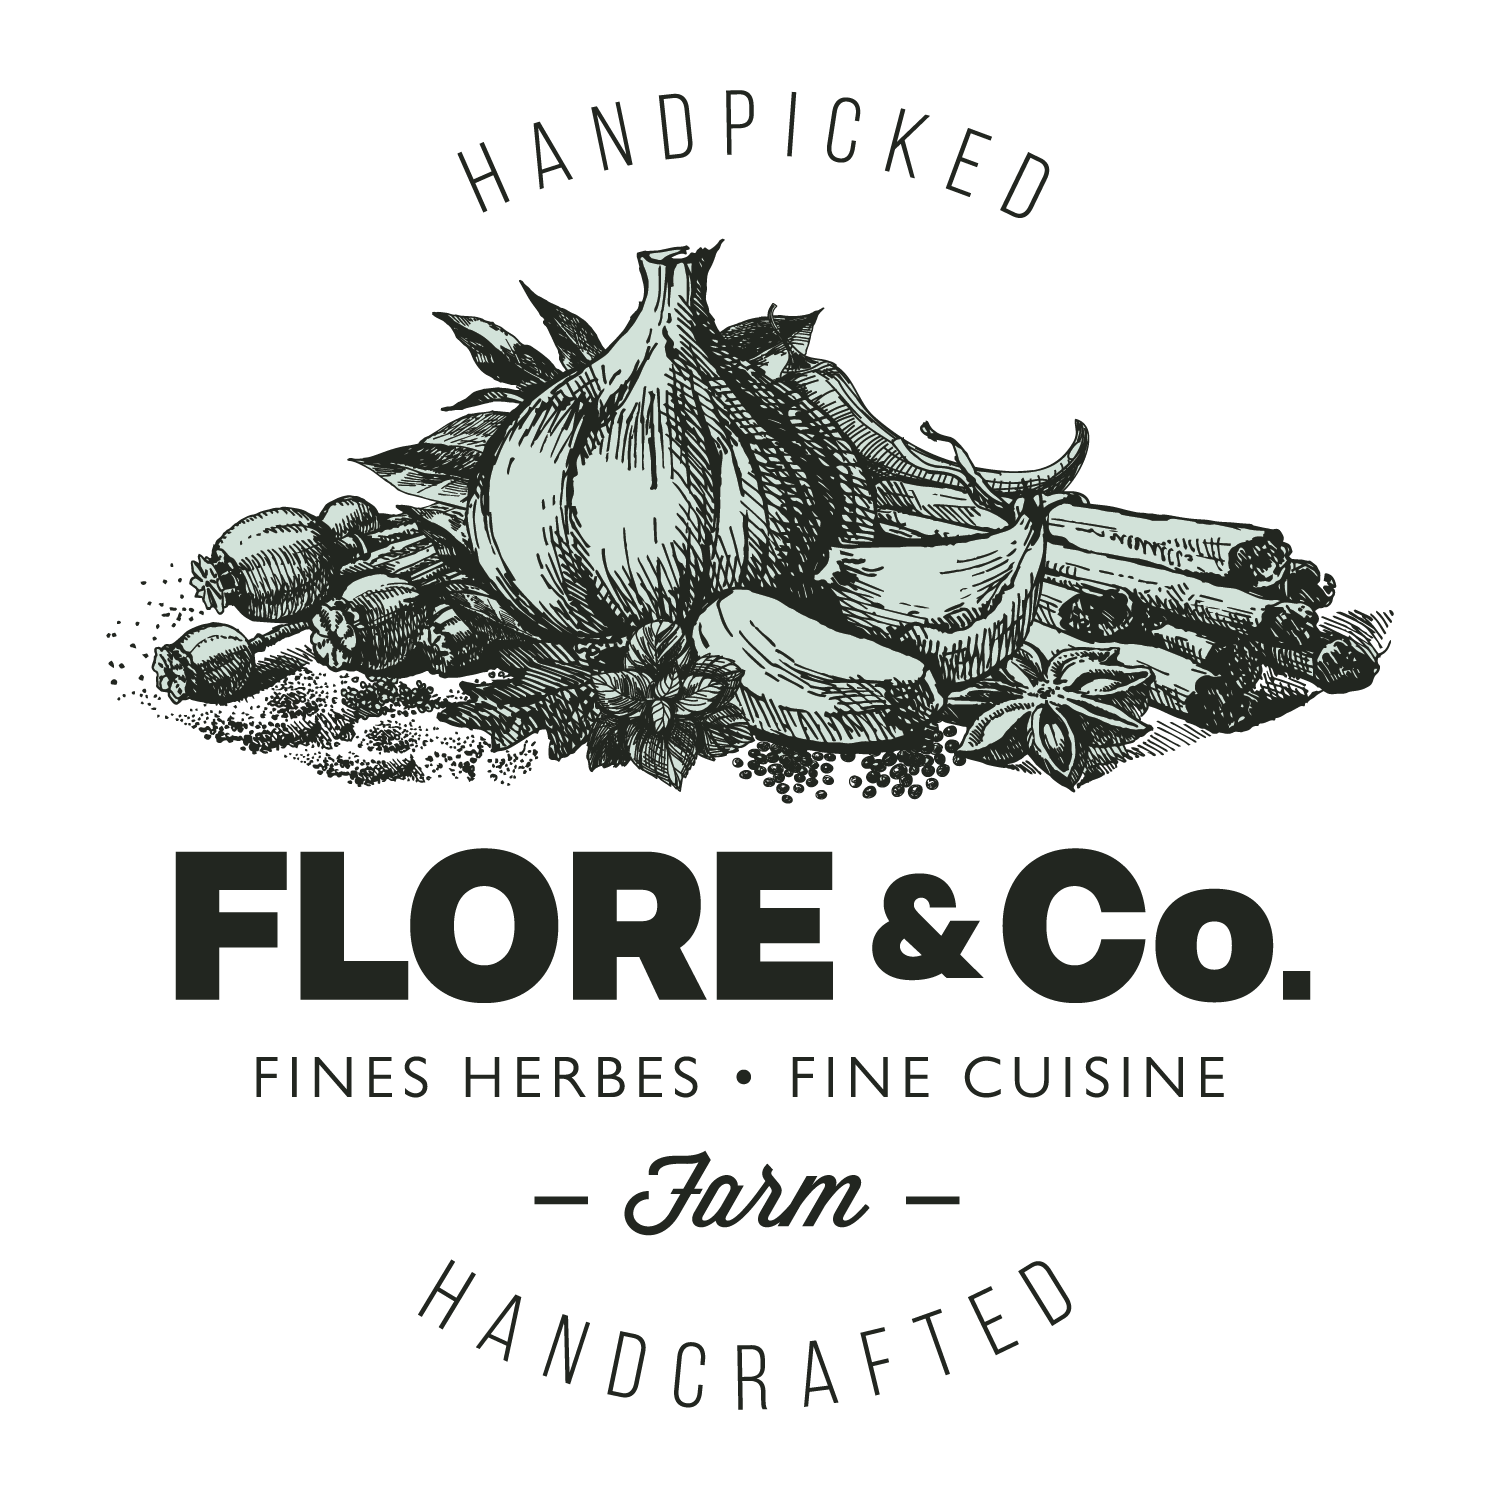 Handpicked, Handcrafted Flore & Co. Corporate Logotype